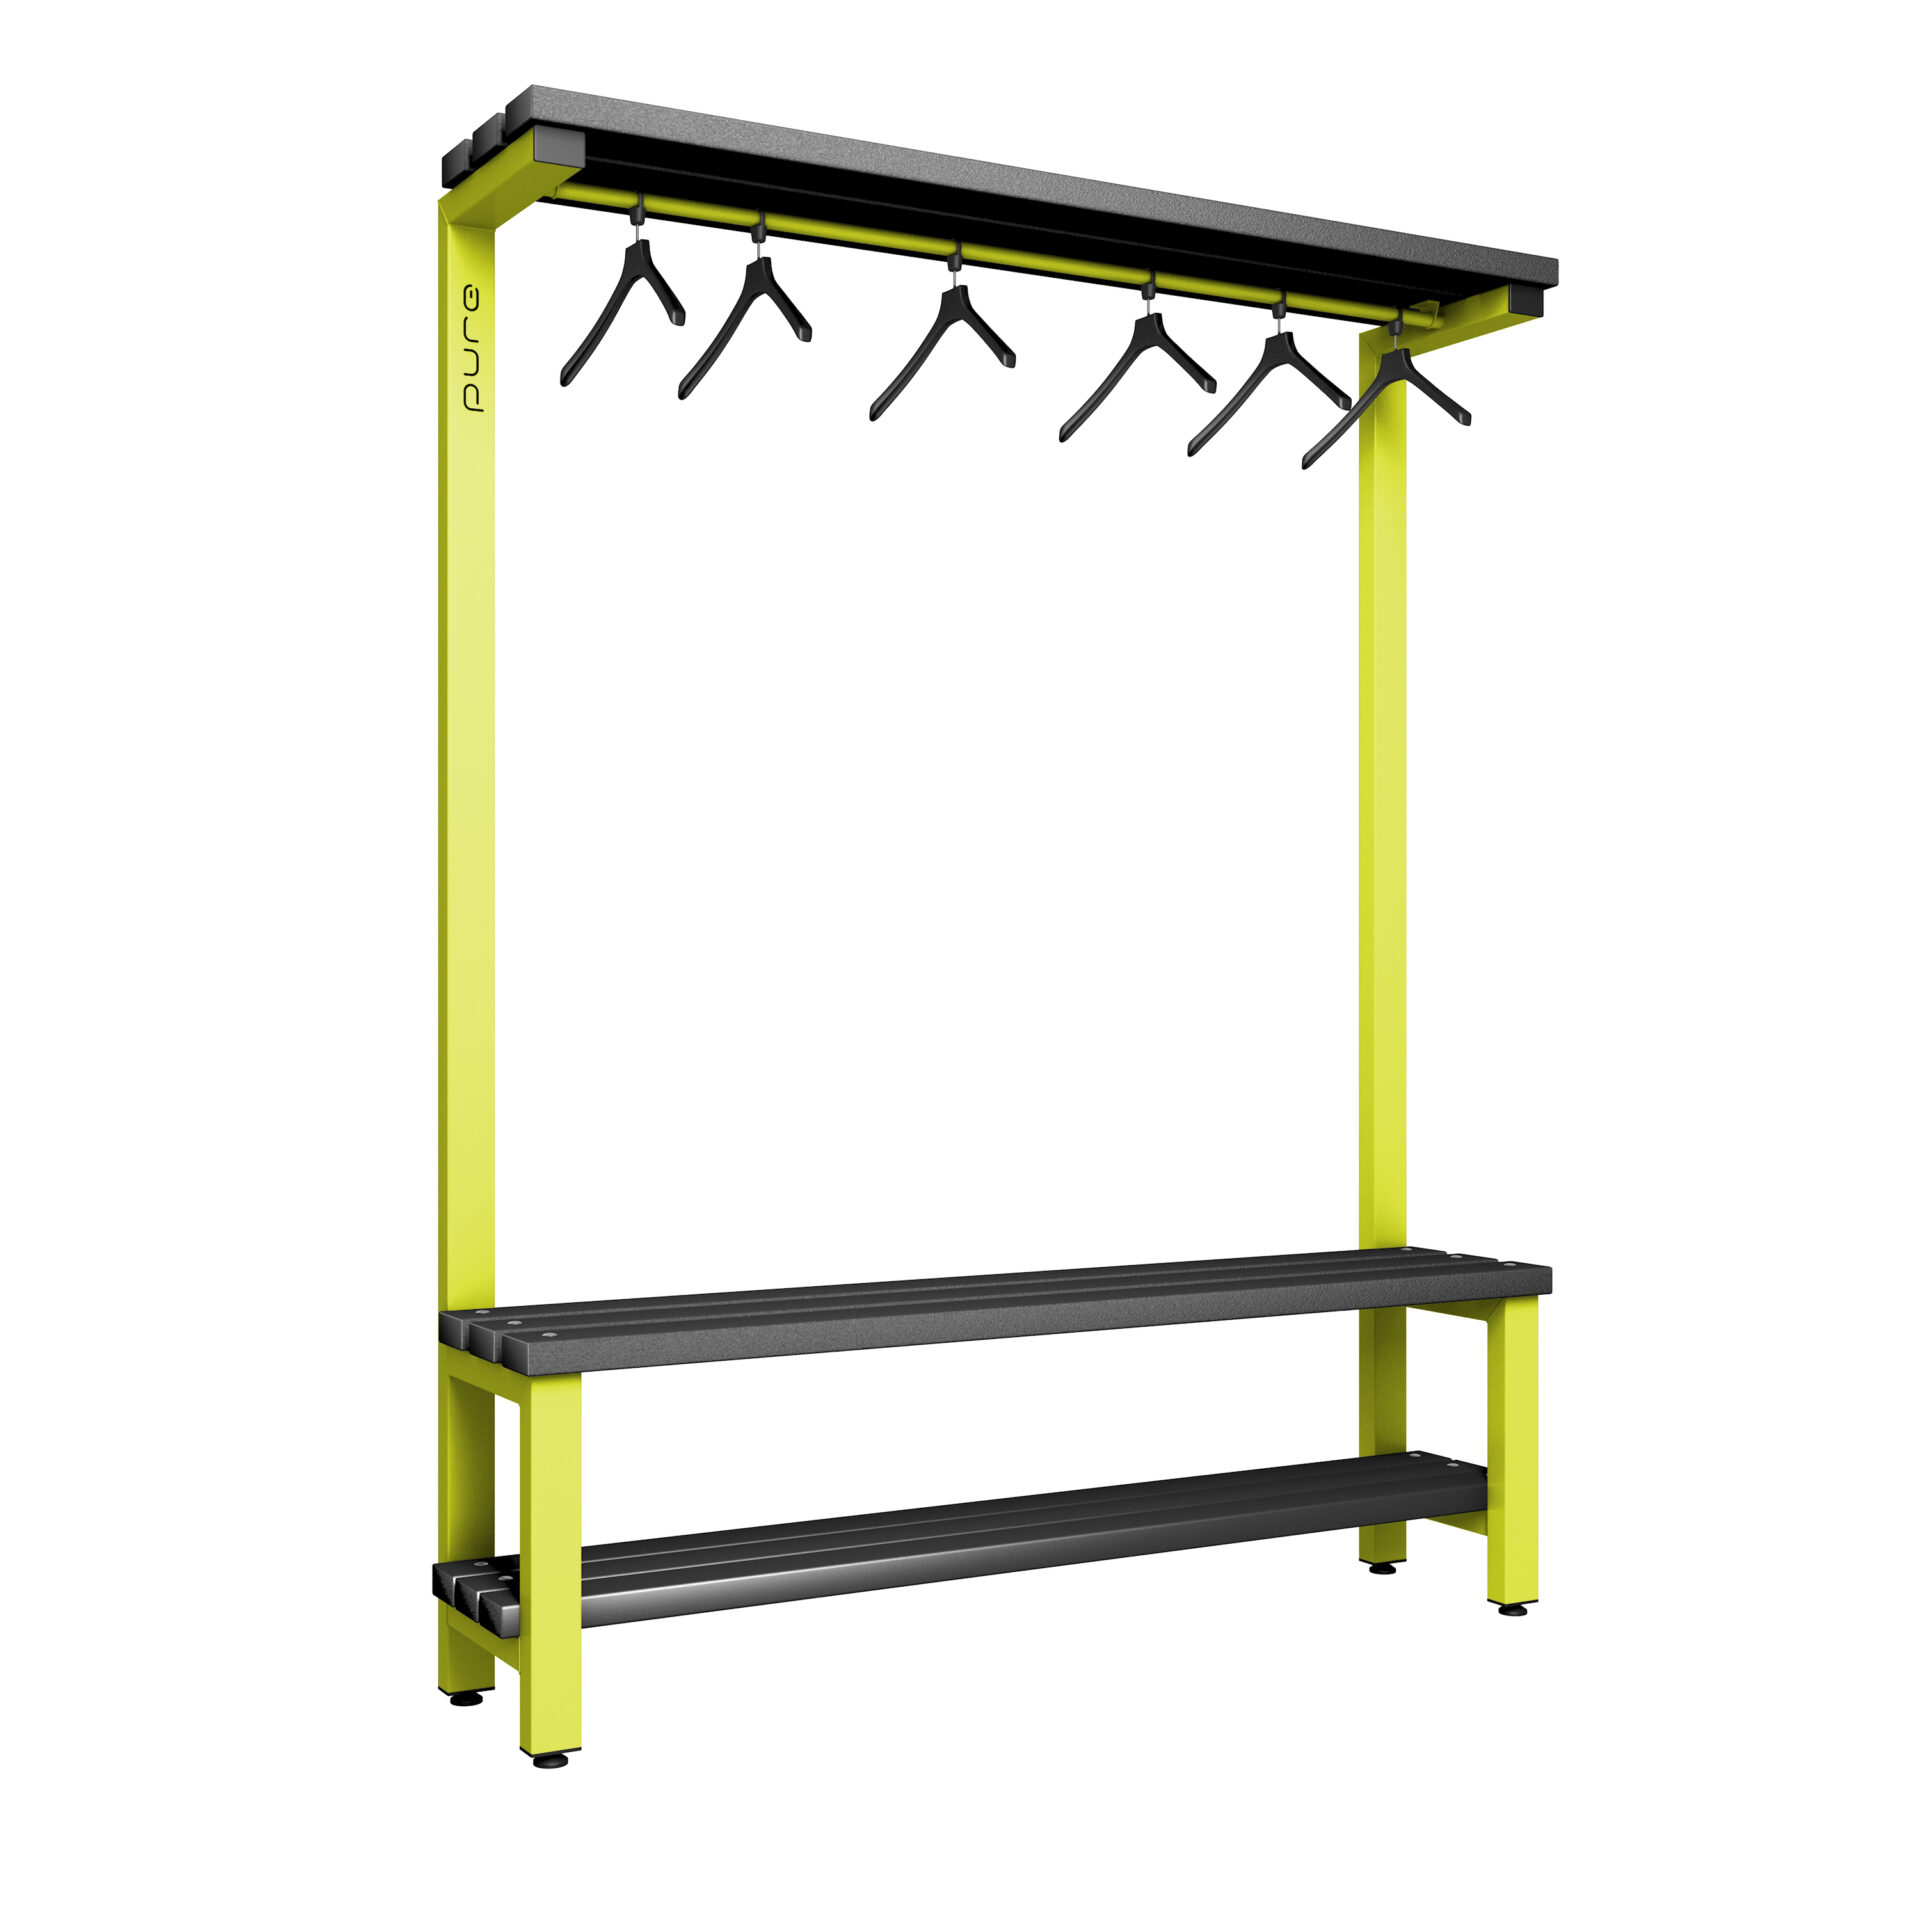 Pure Carbon Zero Single Sided 1500mm Overhead Hanging Bench With Shoe Shelf